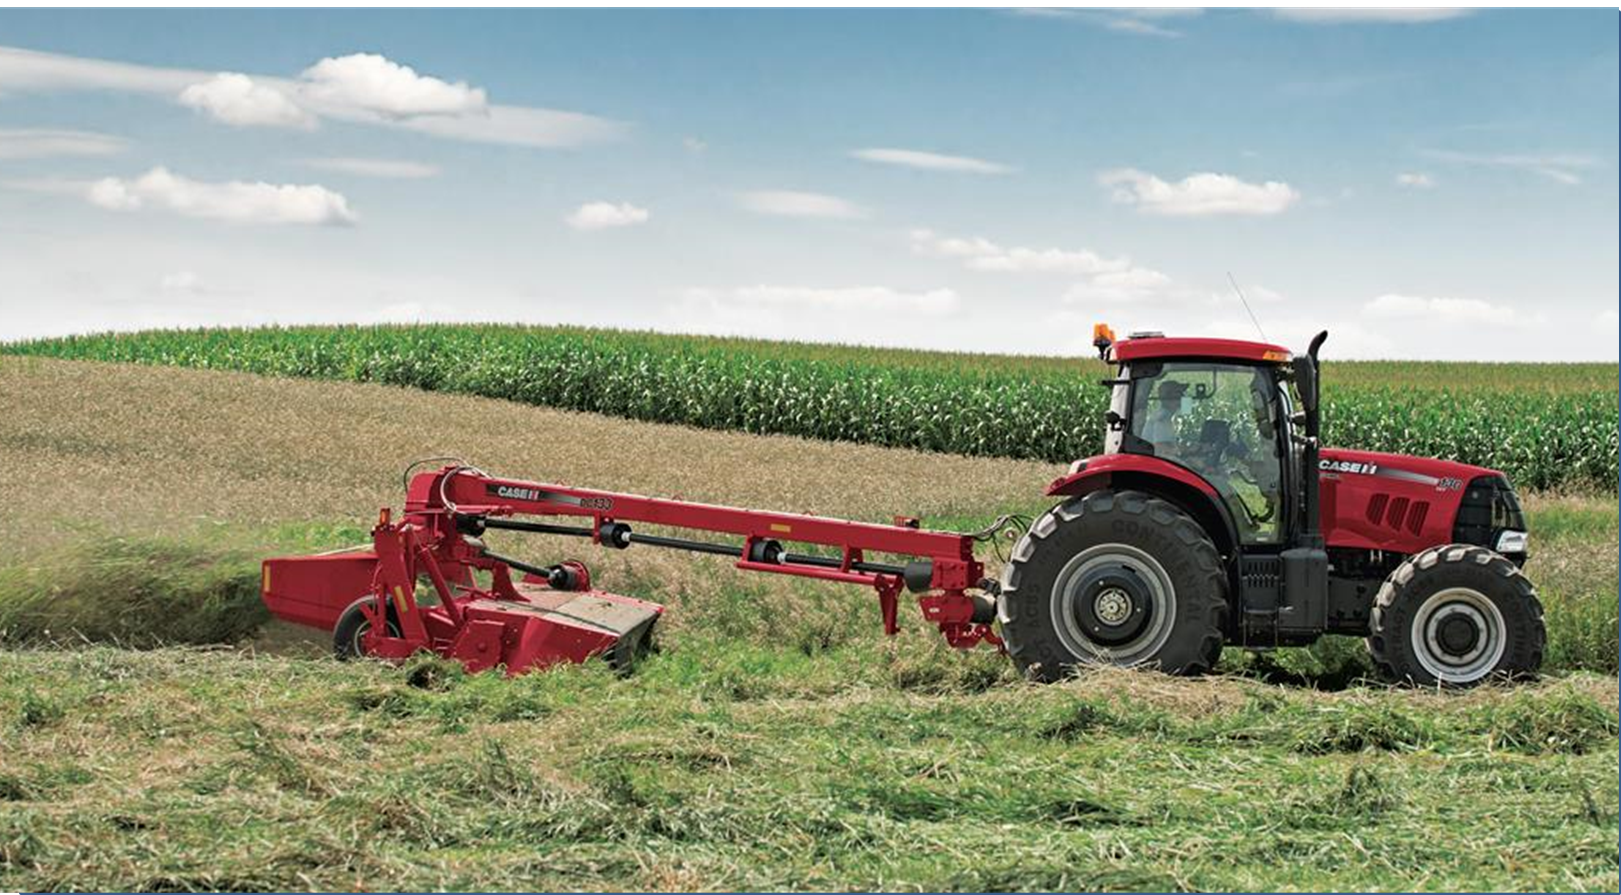 Puma Tractor with a Disc Mower Conditioner at work